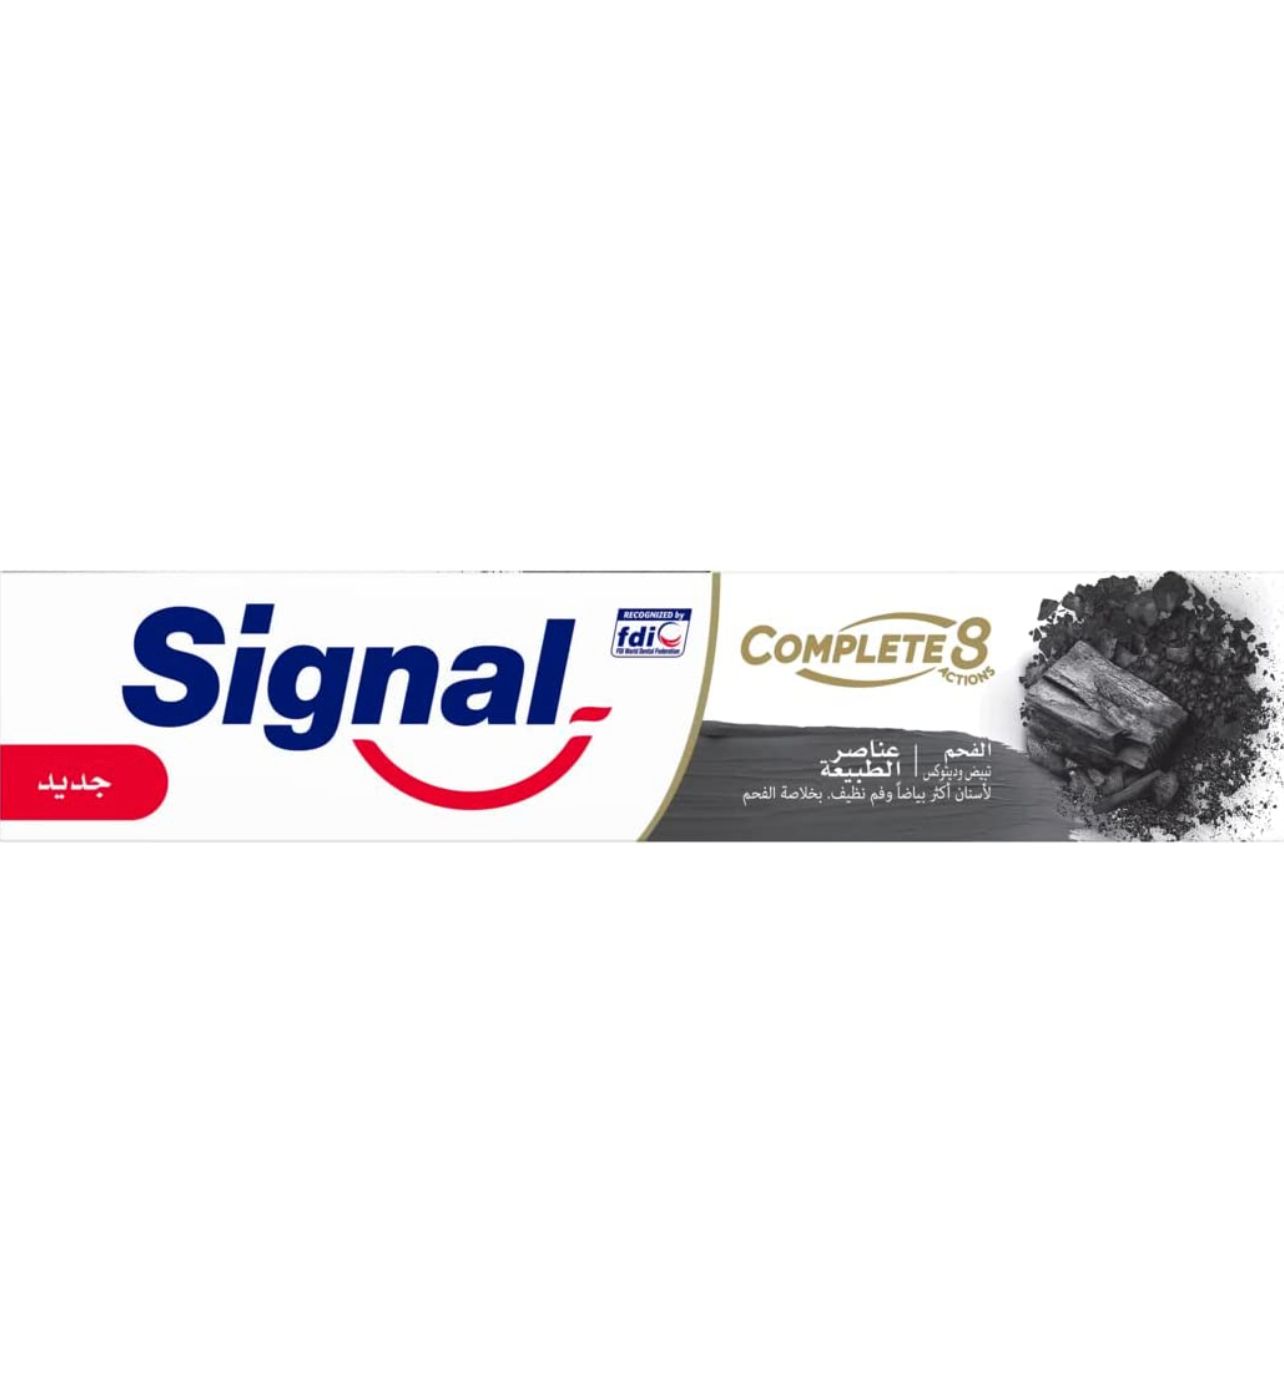 signal charchoal complete 8 toothpaste 50ml